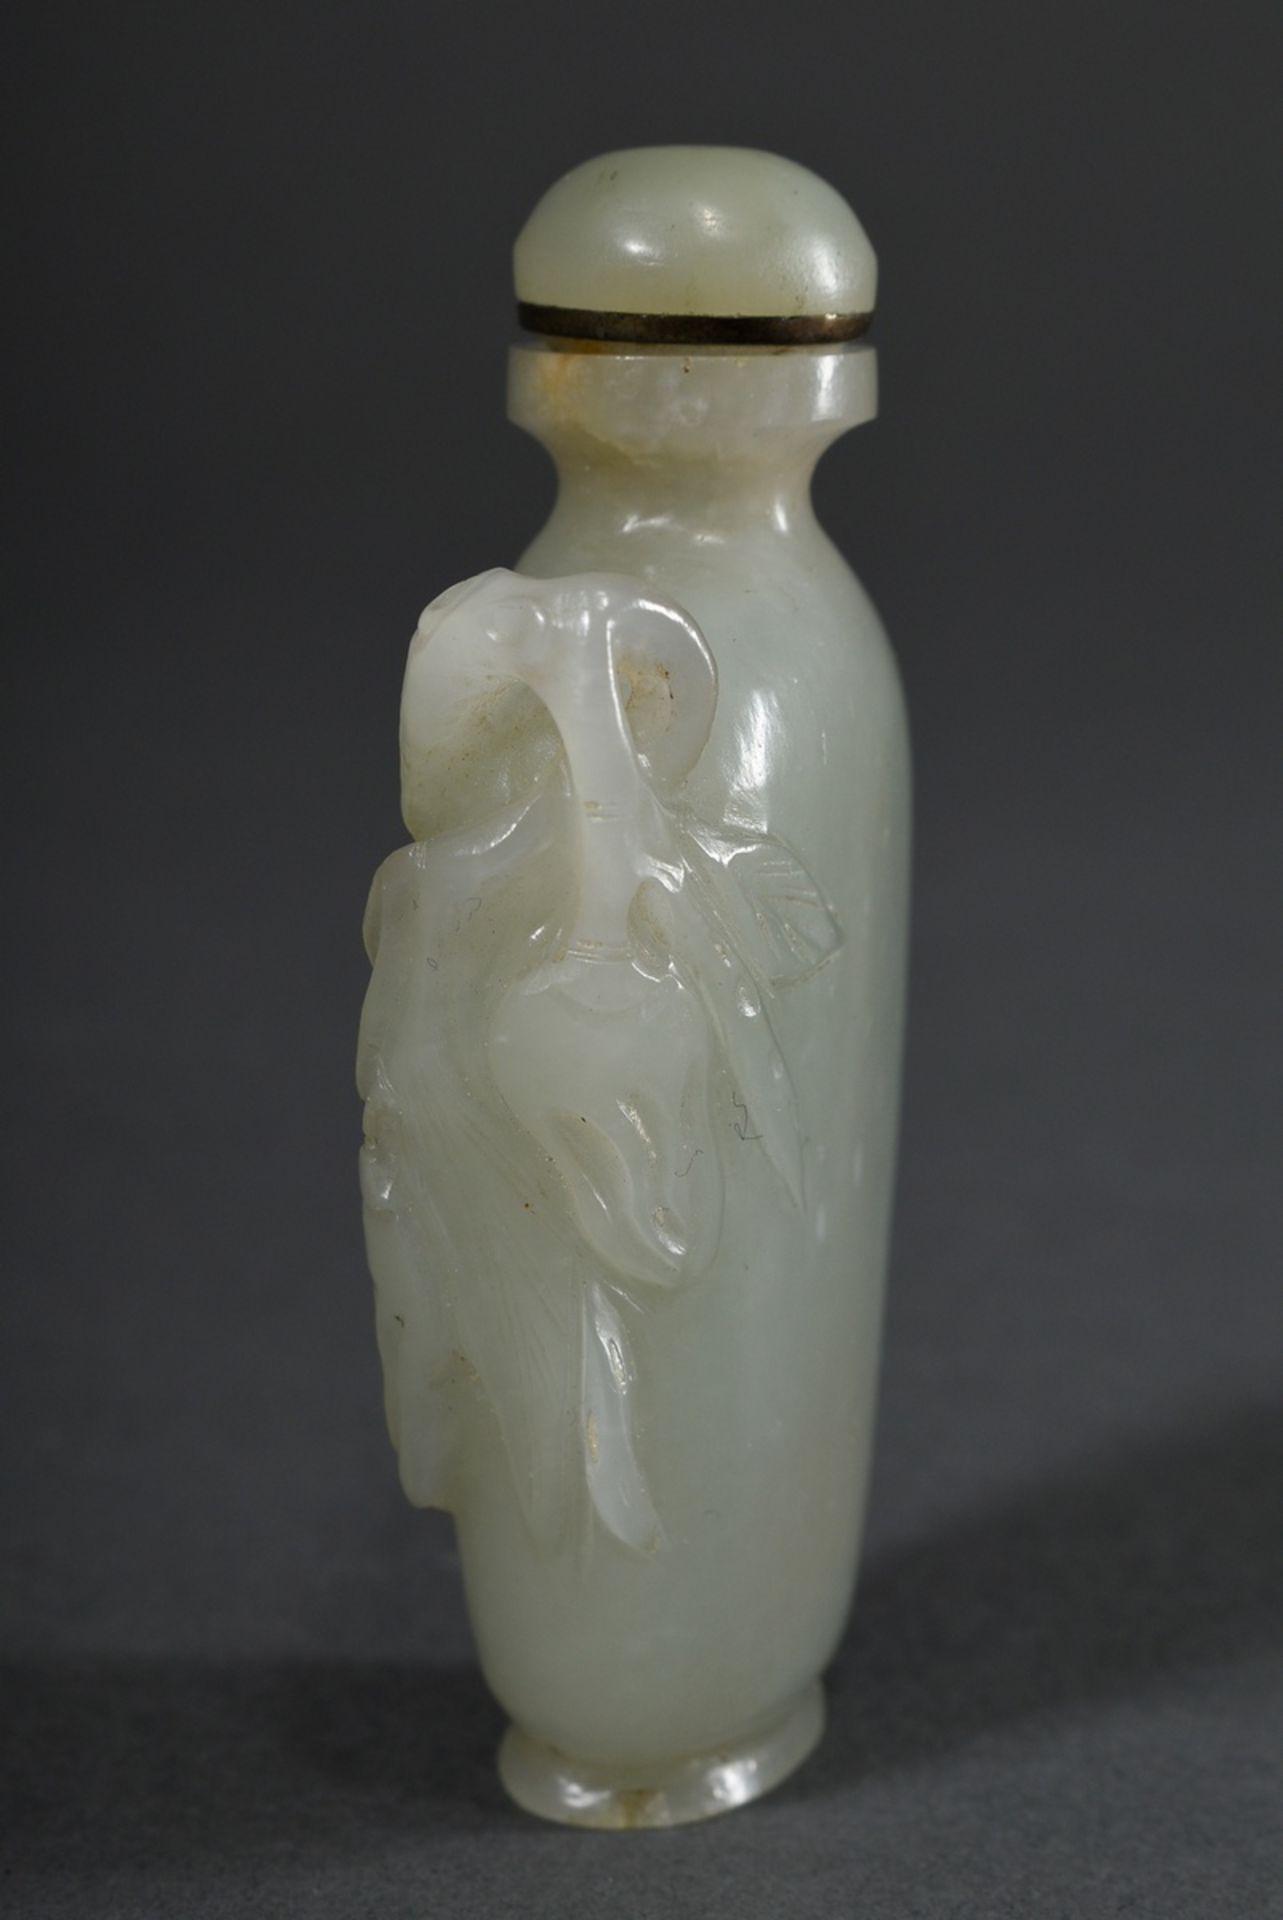 Seladon jade snuffbottle with "flower and leaf decoration" in high relief, China probably Qing dyna - Image 3 of 5